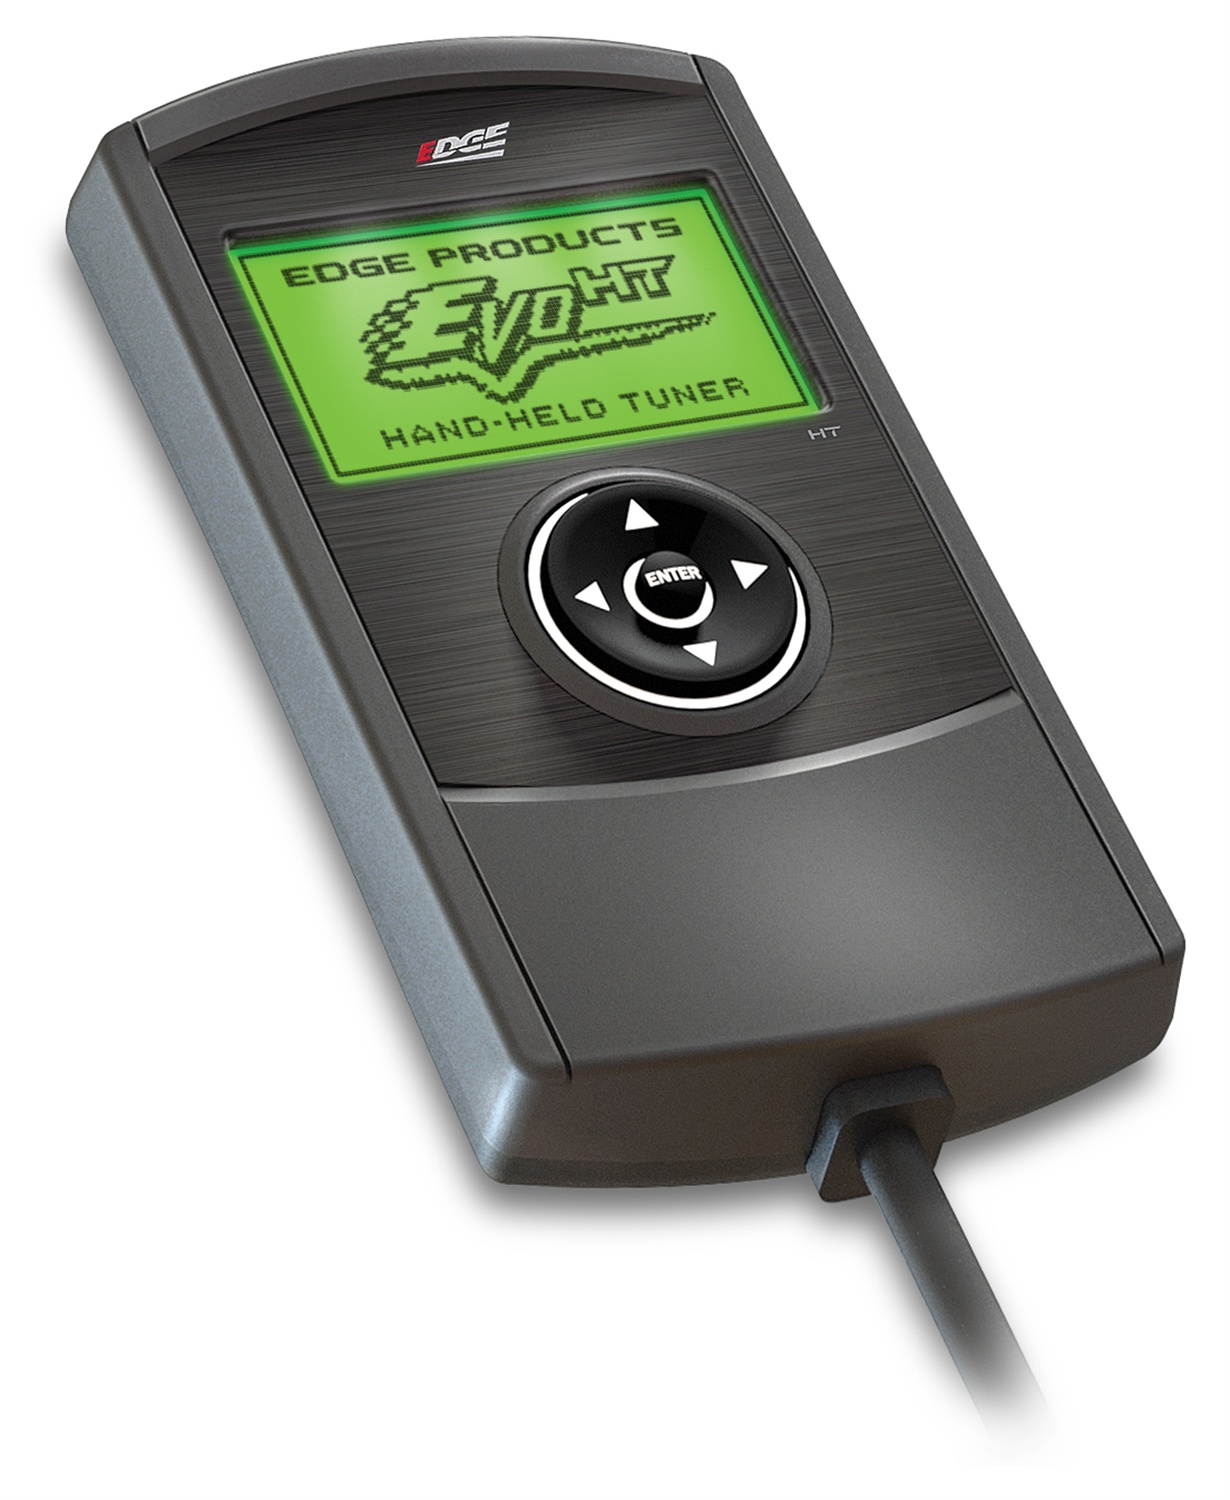 Edge Products Edge Products 26030 EvoHT Programmer